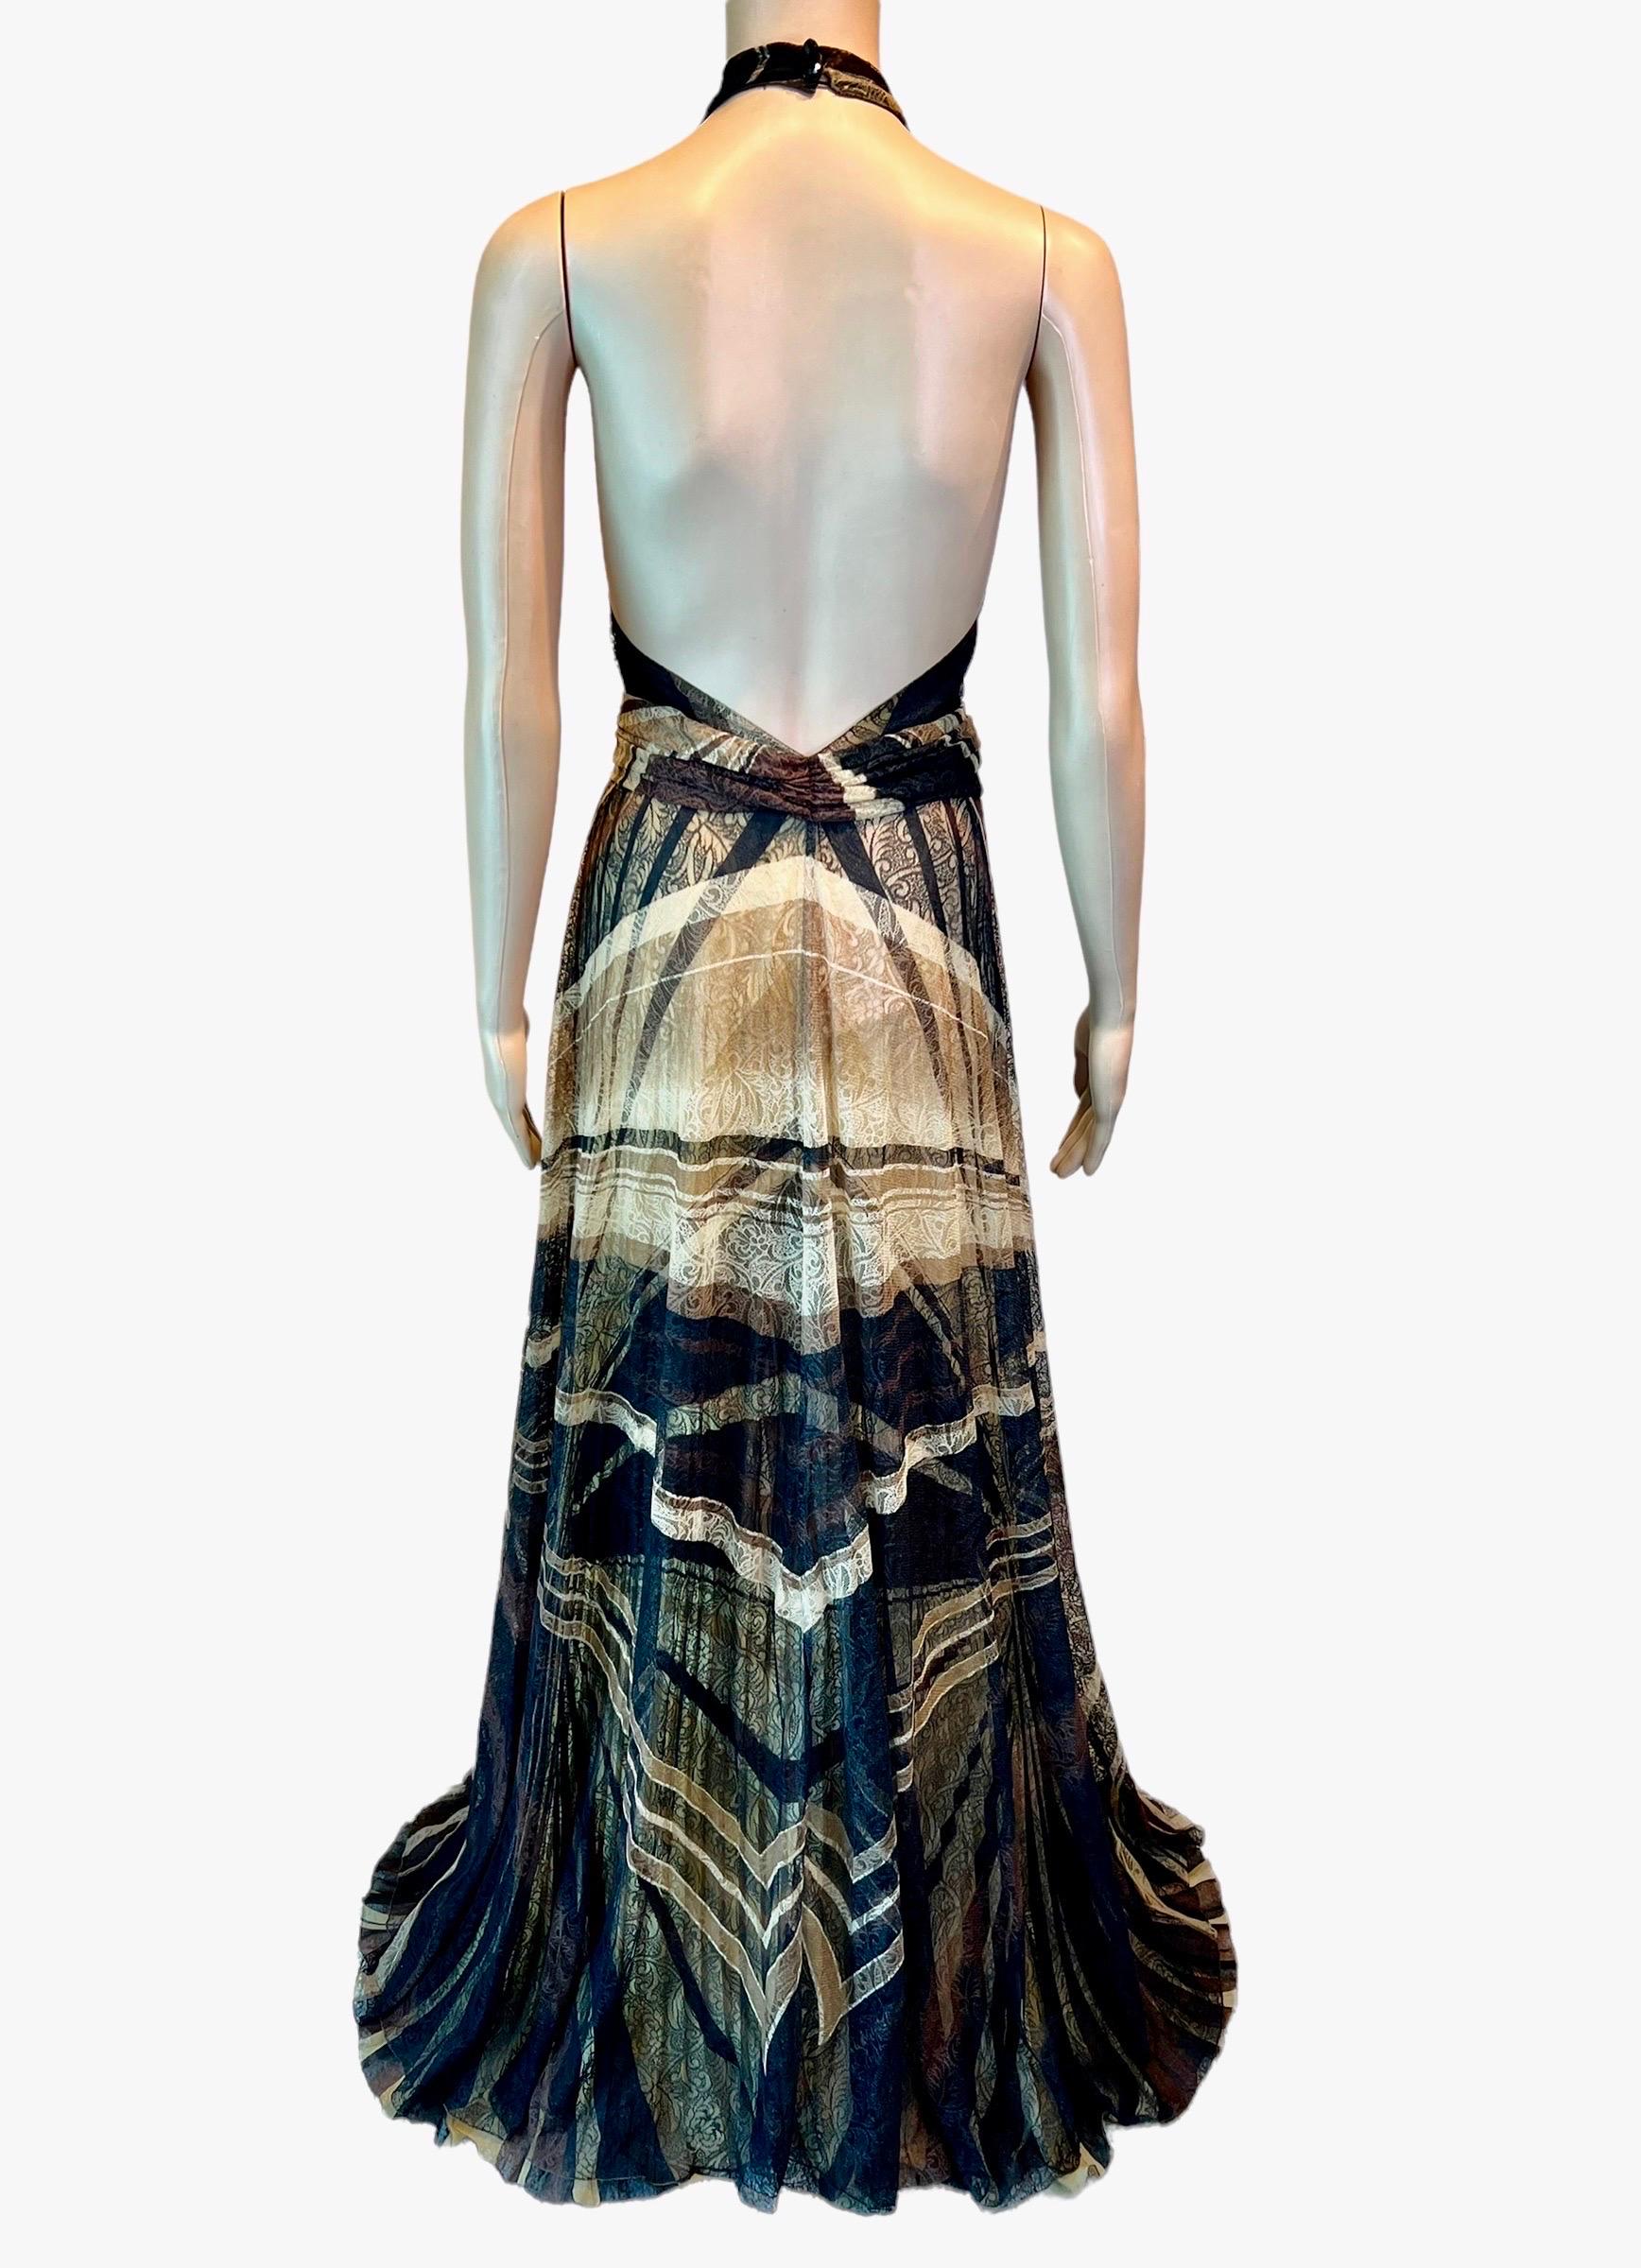 Women's Gianni Versace F/W 2000 Runway Plunging Lace Silk Backless Evening Dress Gown For Sale